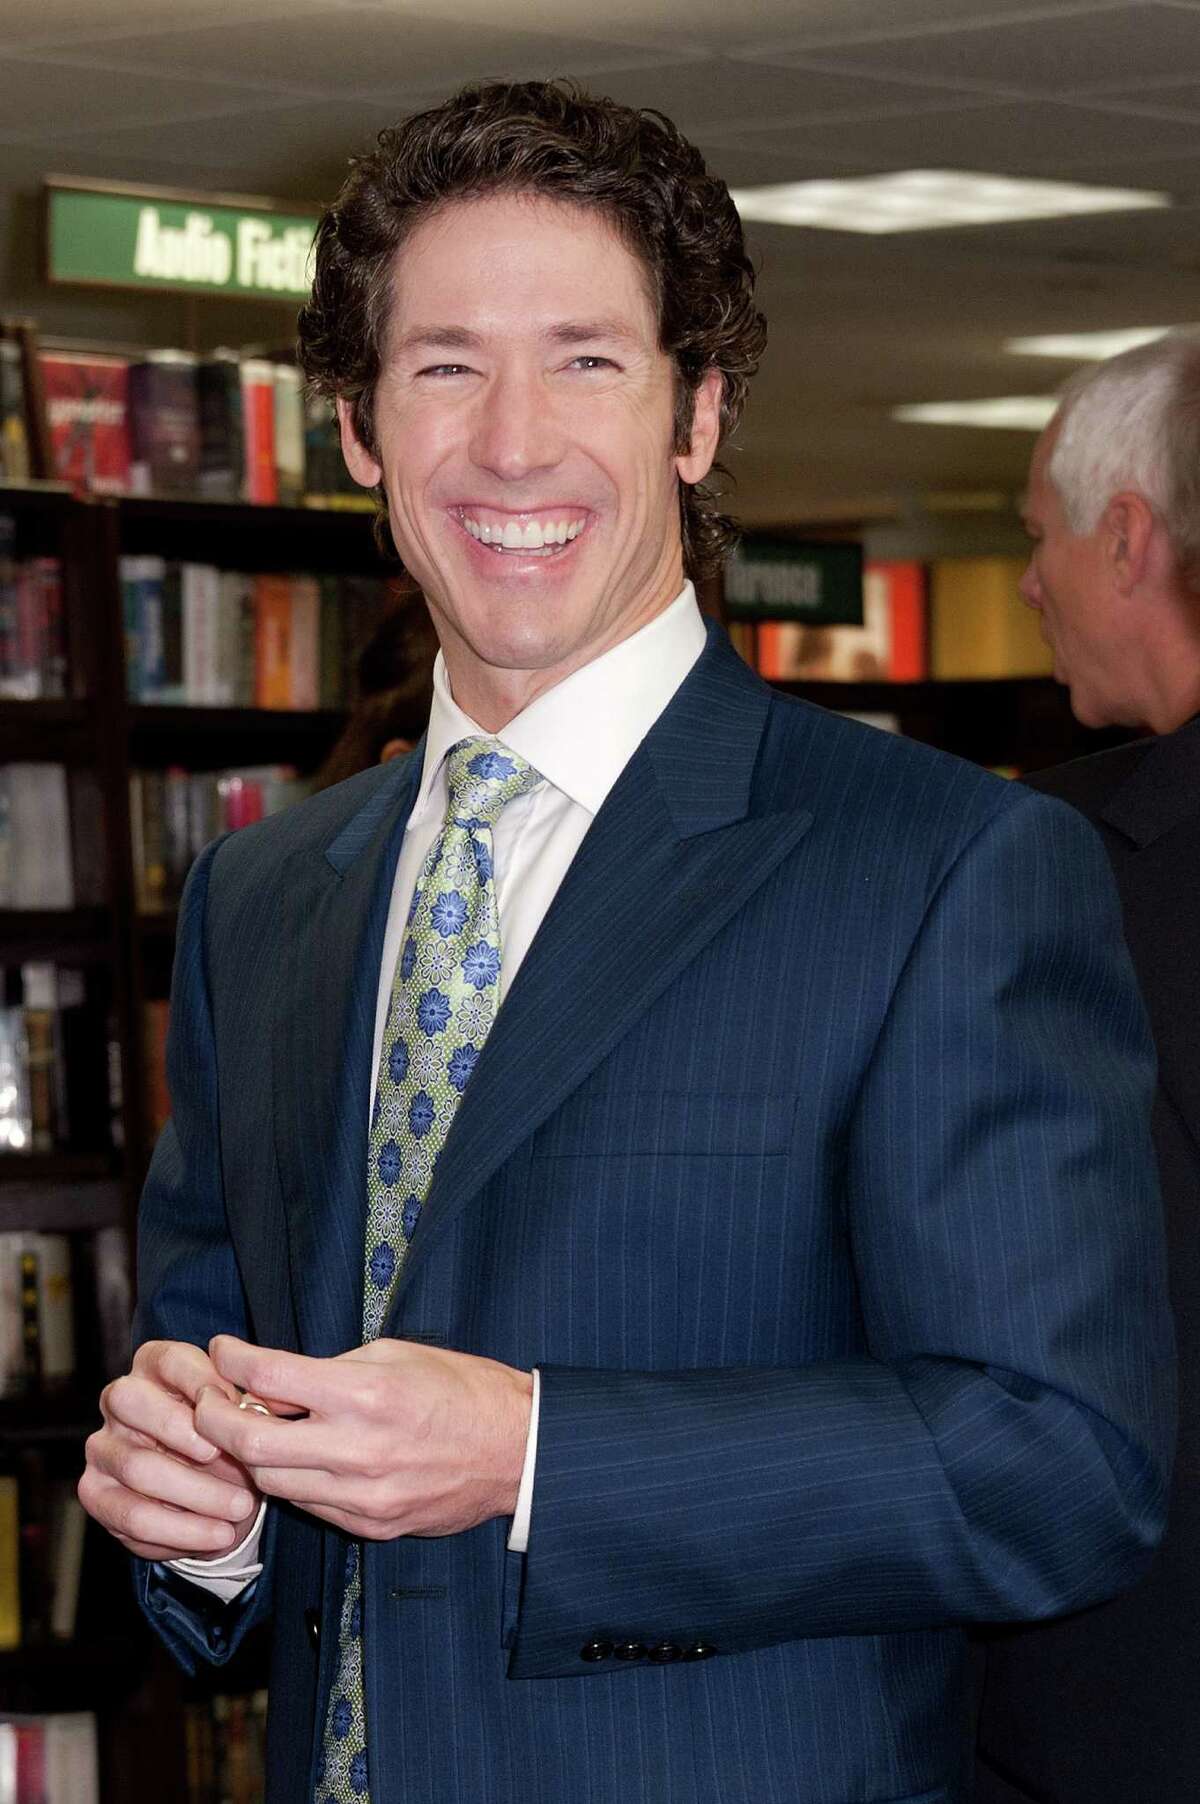 Minister Joel Osteen of Lakewood Church in Houston has signed on to the project as executive producer.